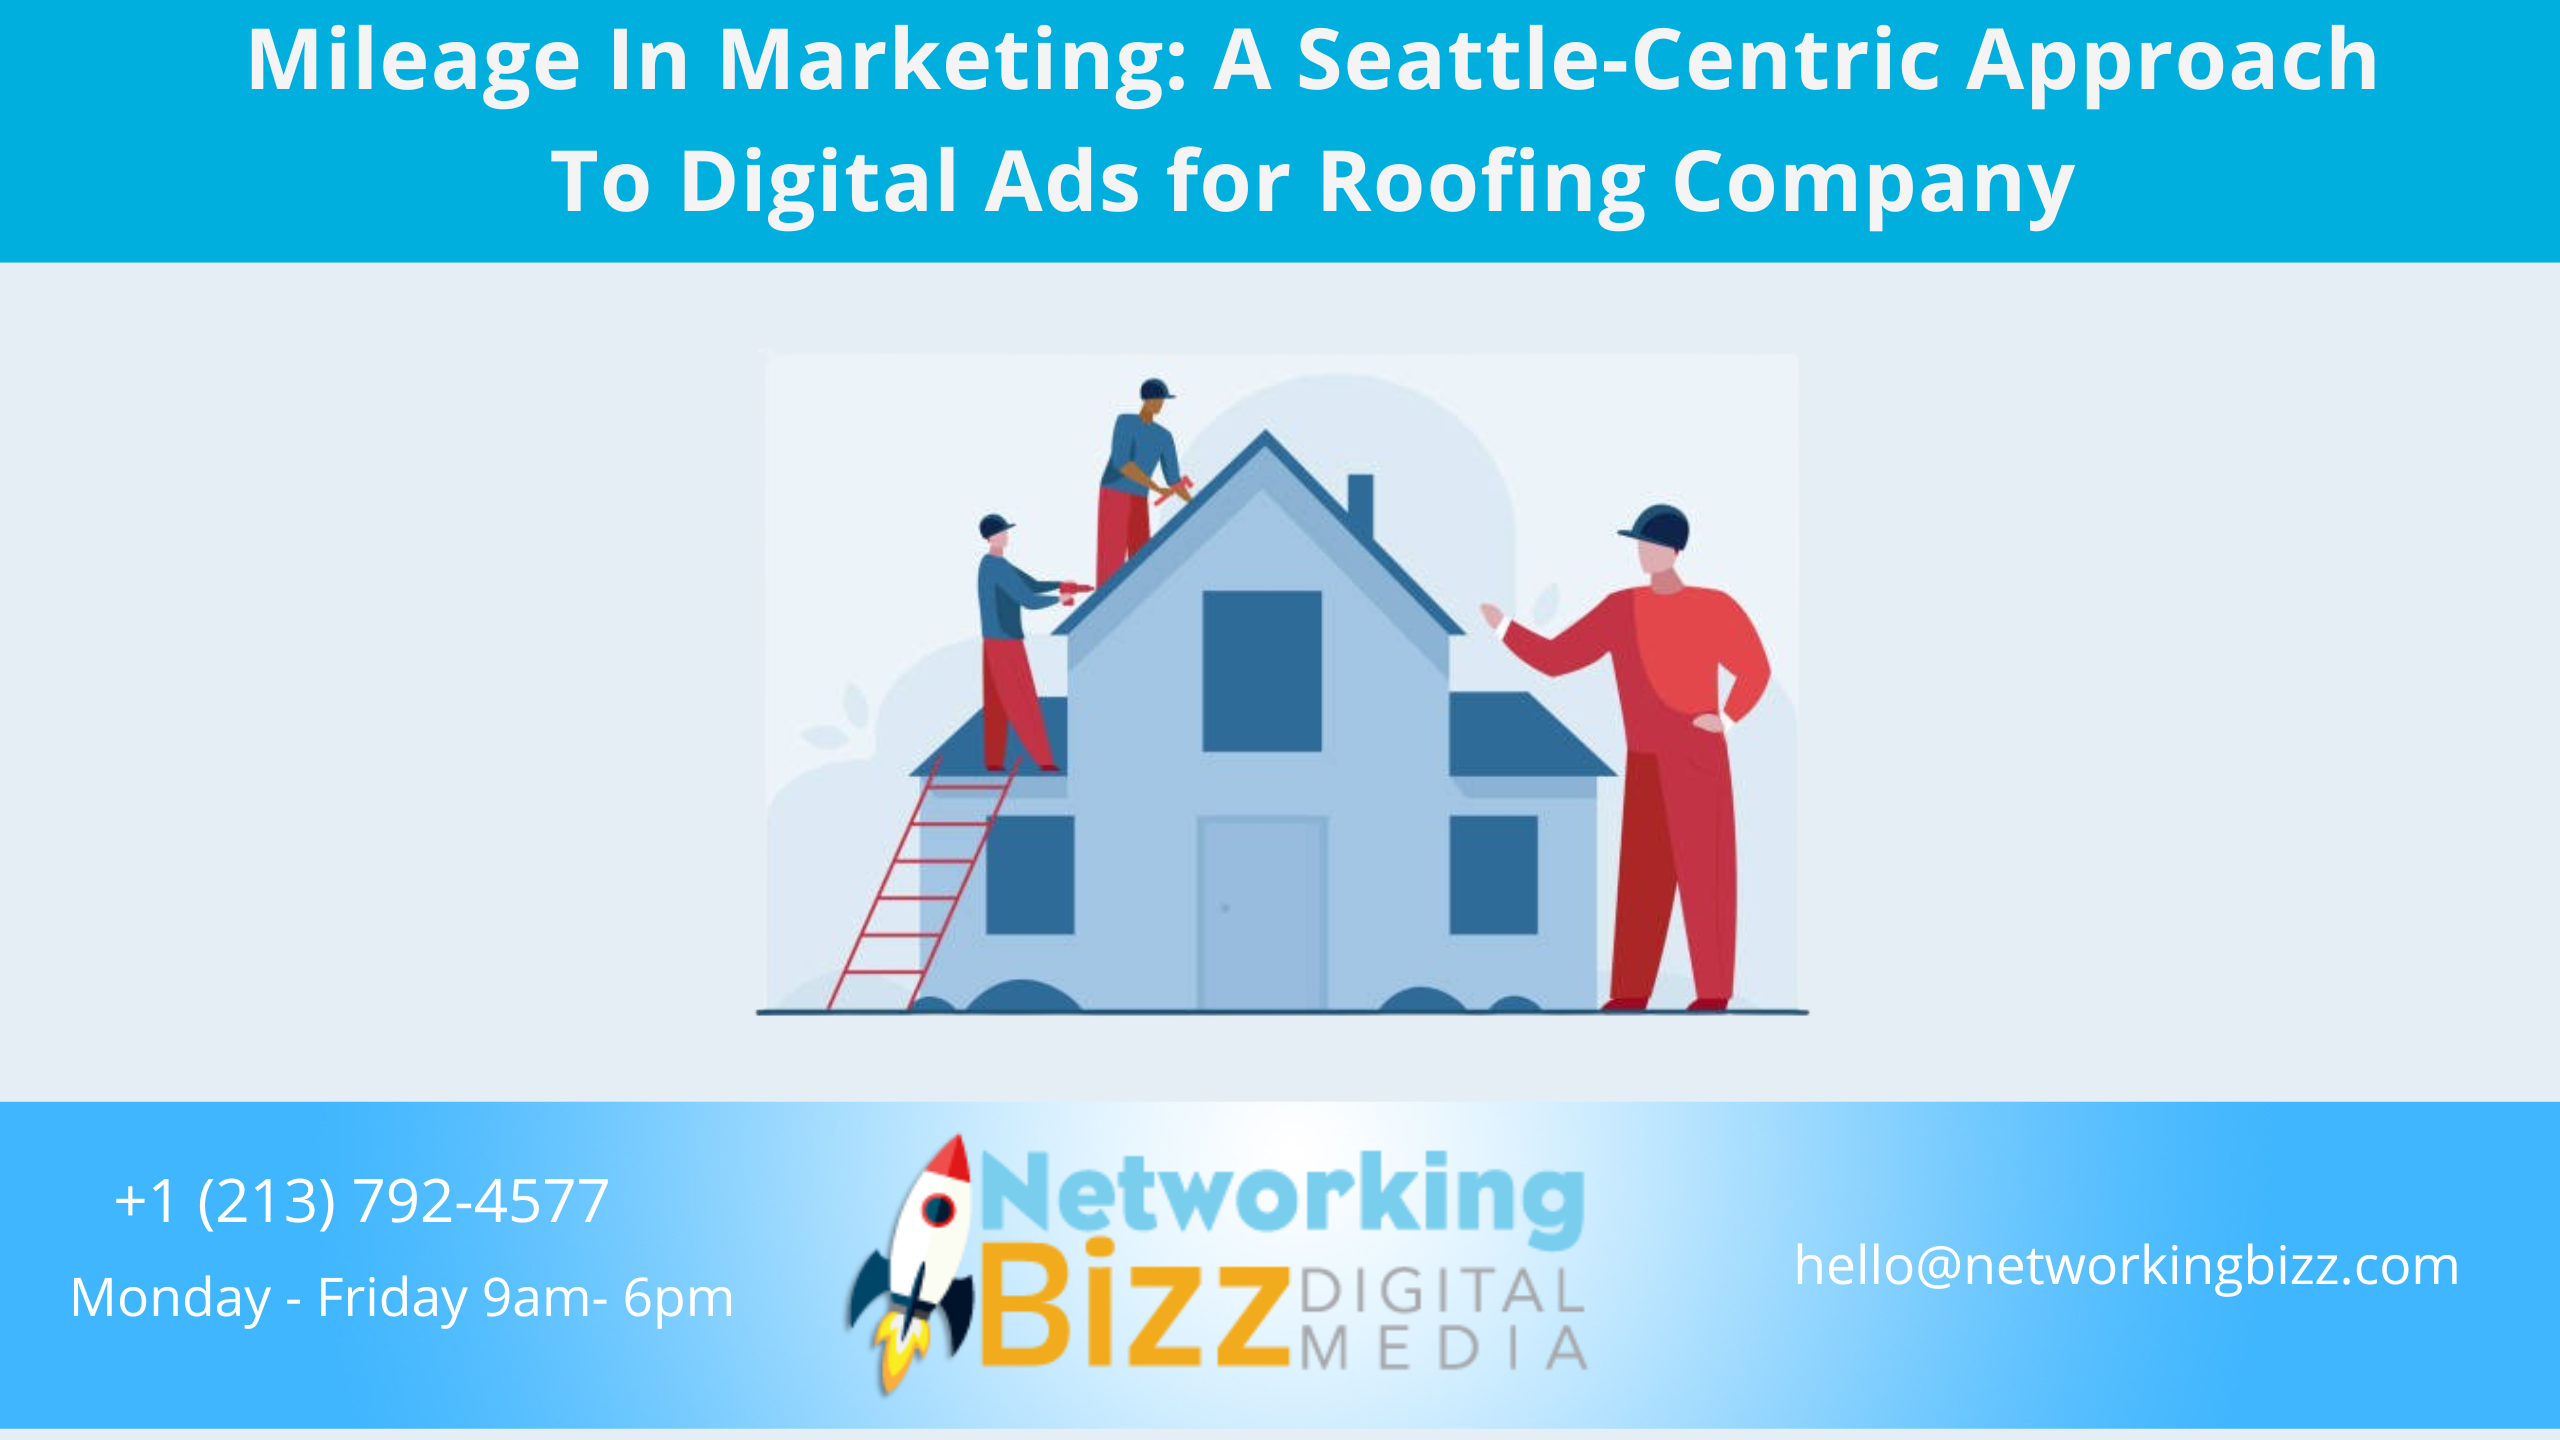 Mileage In Marketing: A Seattle-Centric Approach To Digital Ads for Roofing Company